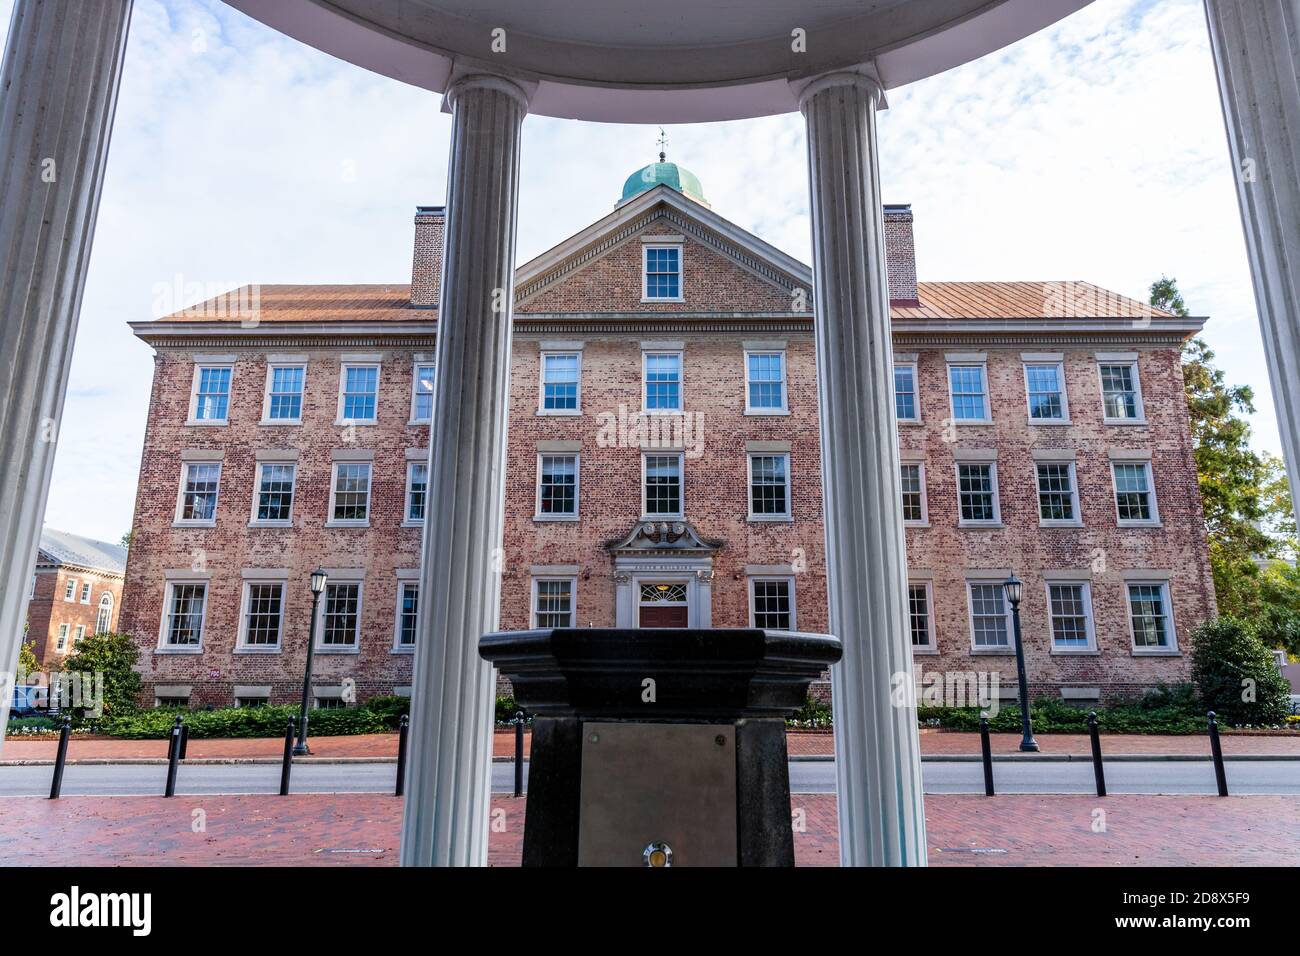 Chapel Hill, NC / USA - October 22, 2020: Looking thru The Old Well to see The South Building on the campus of the University of North Carolina, UNC. Stock Photo